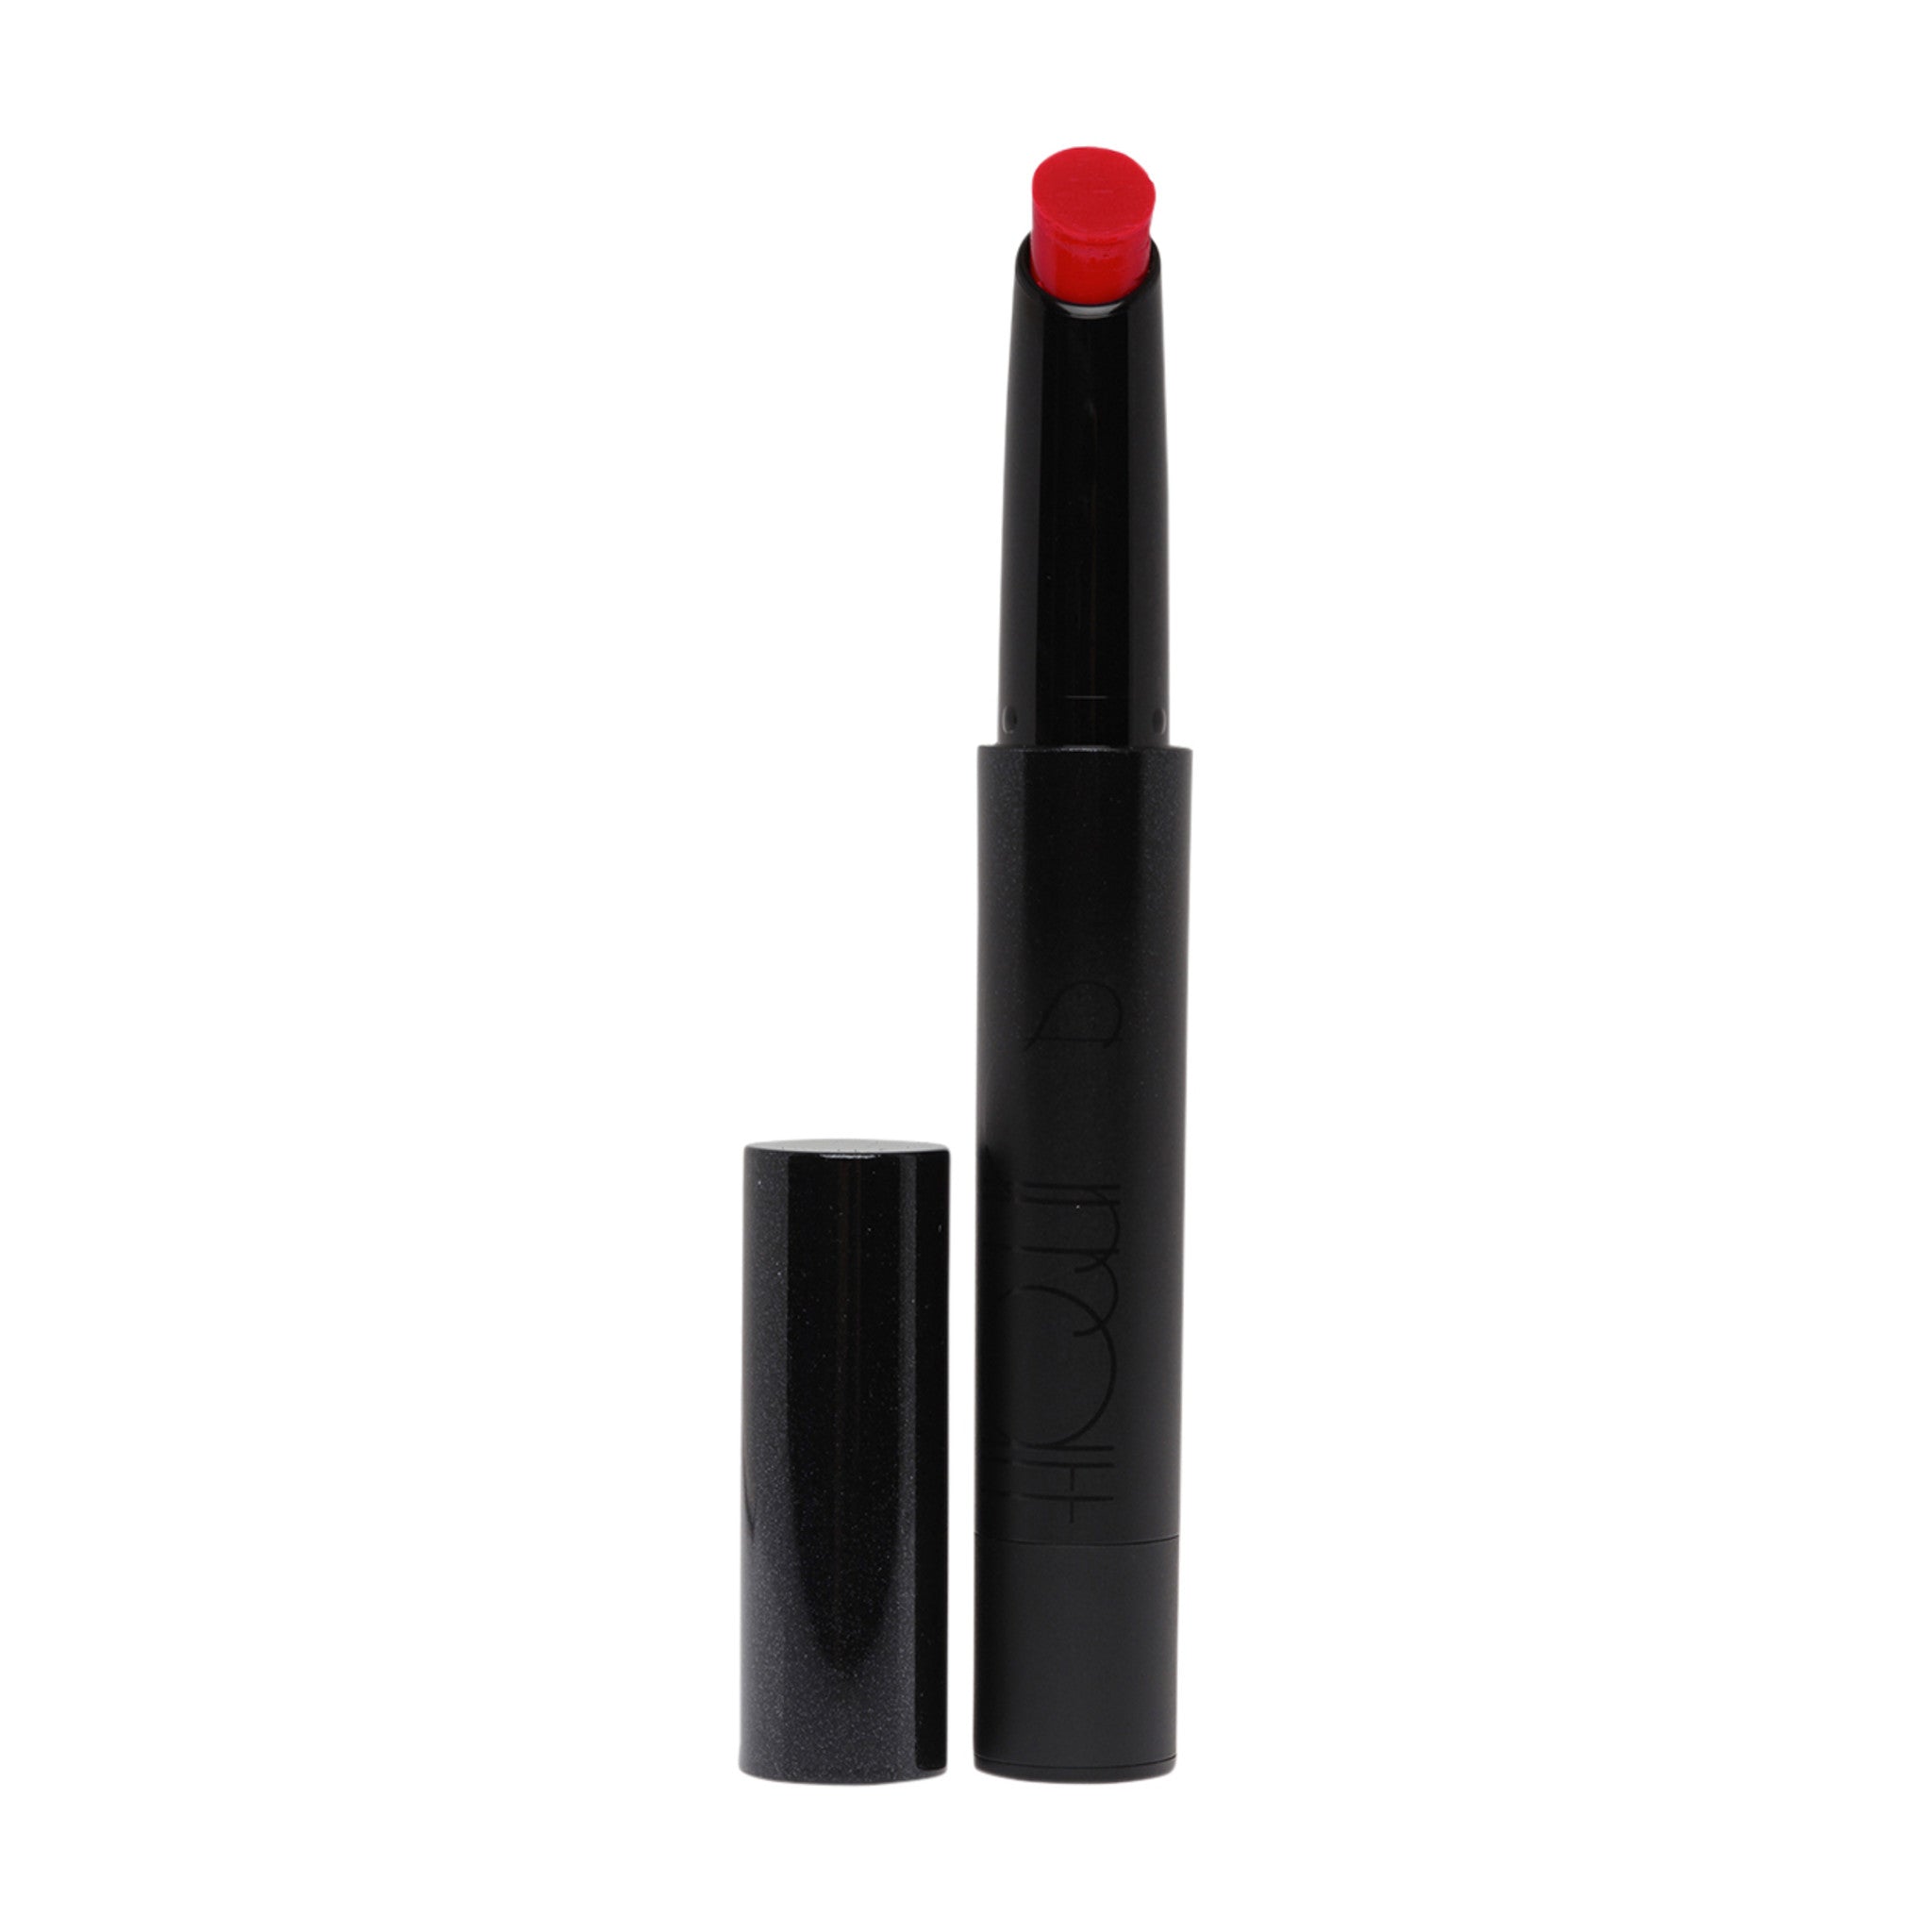 Surratt Lipslique Color/Shade variant: Oh L'Amour (Sheer Red) main image. This product is in the color red